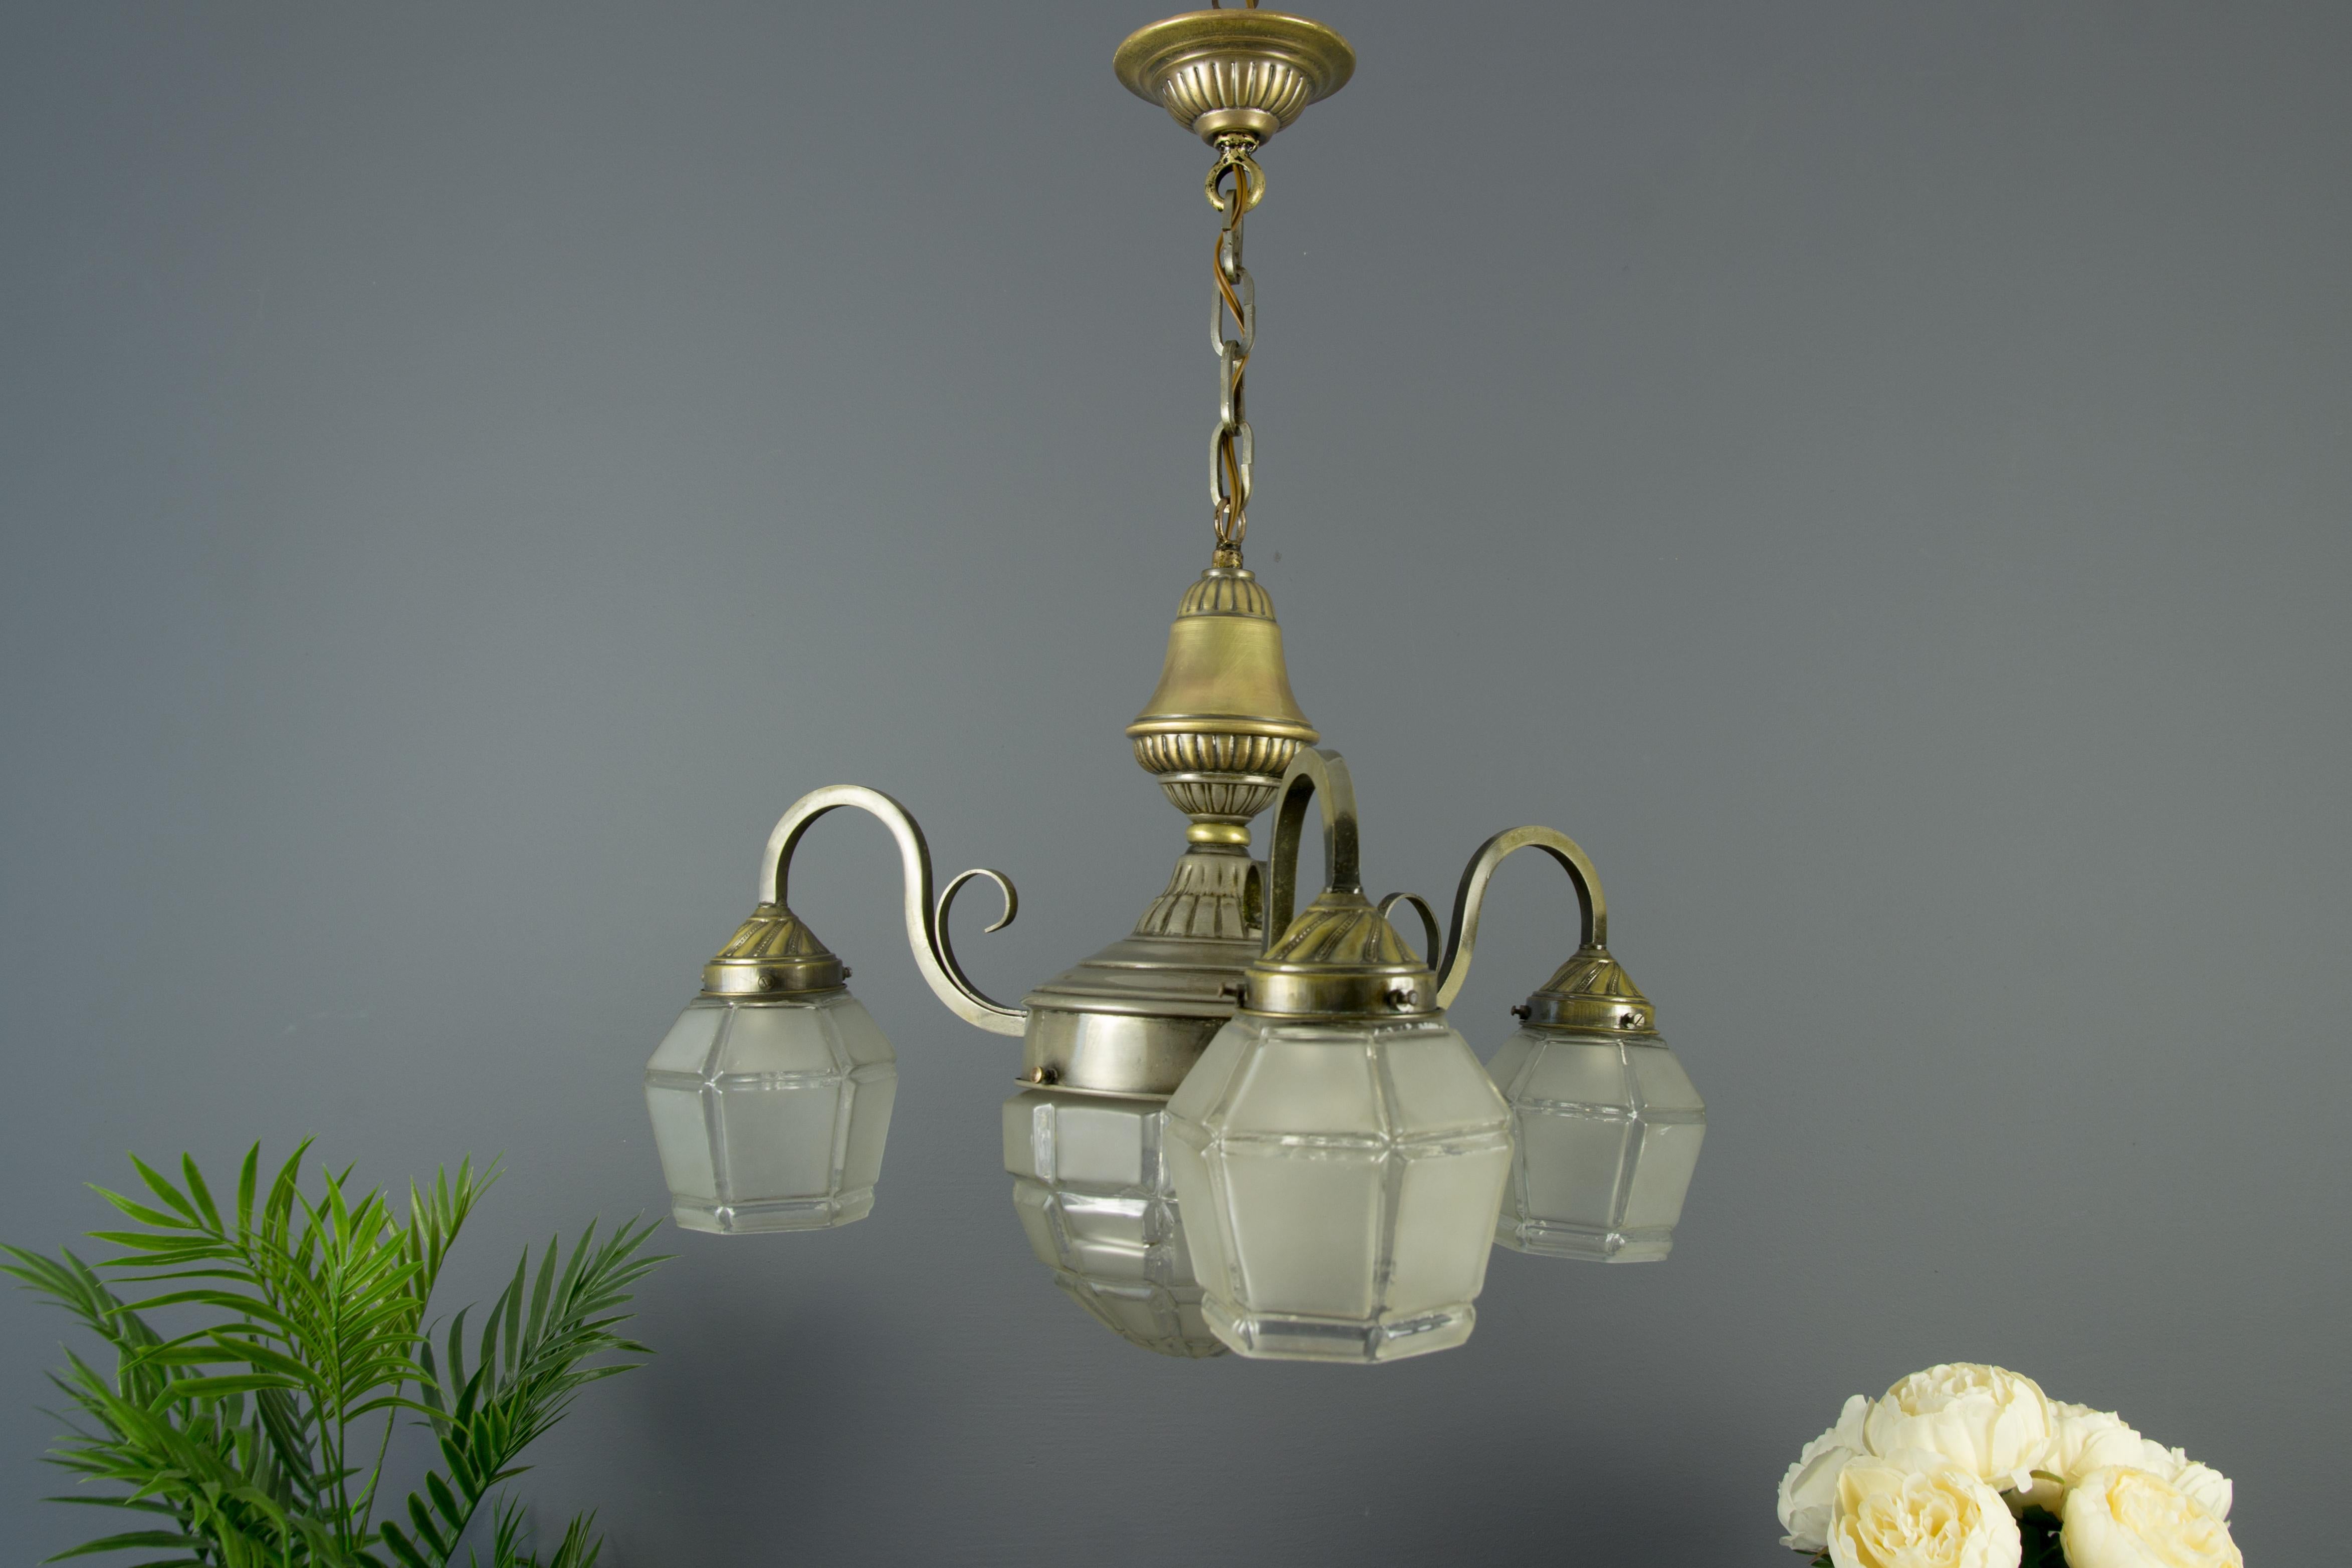 French Art Deco Brass and White Frosted Glass Four-Light Chandelier, 1930s For Sale